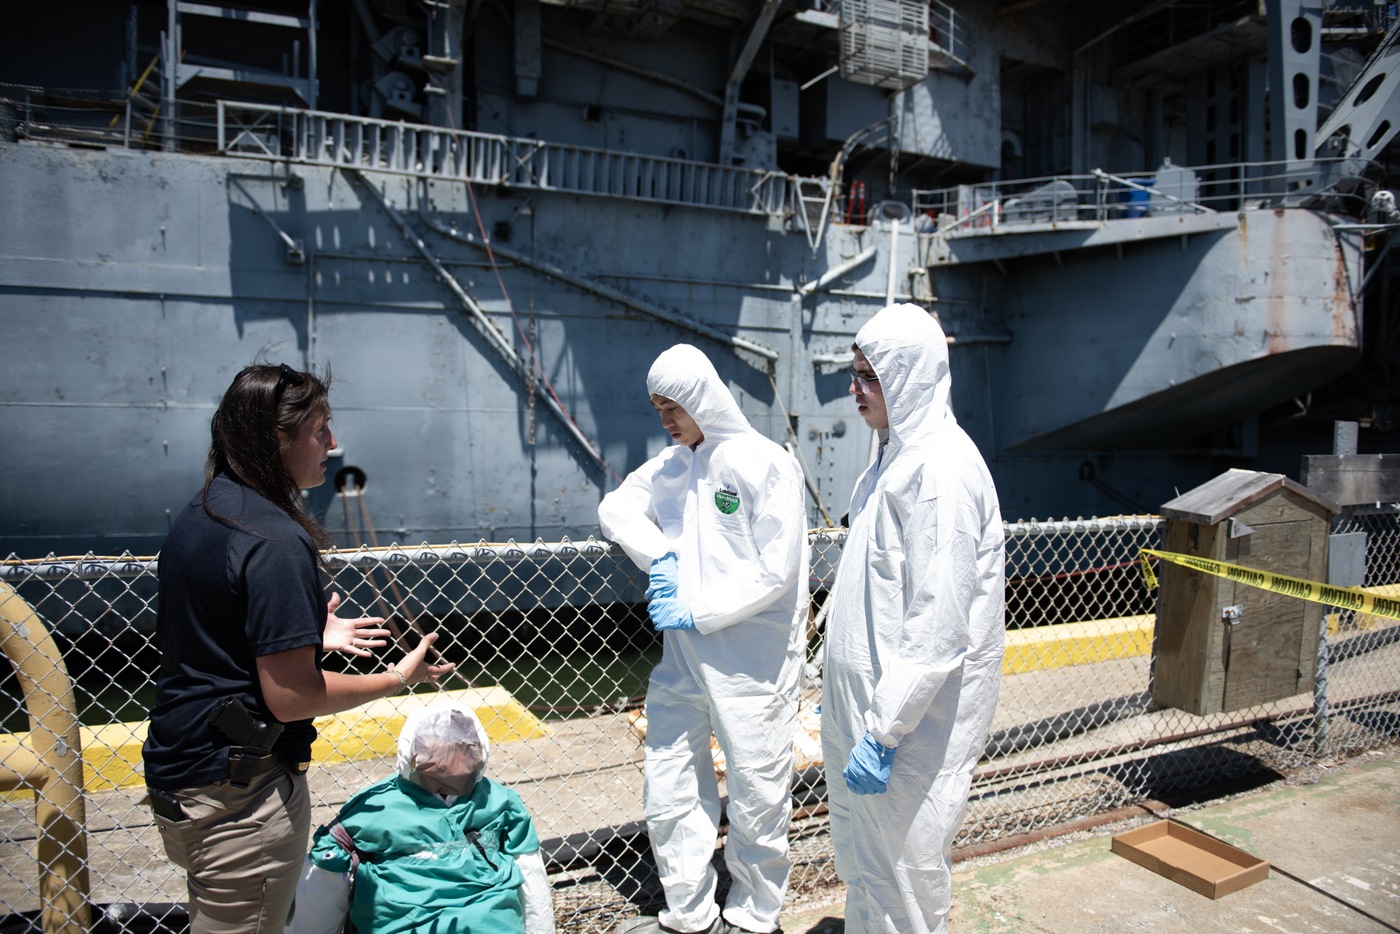 FBI San Francisco Teen Academy students try on Tyvek suits in front of the USS Hornet in Alameda, California.